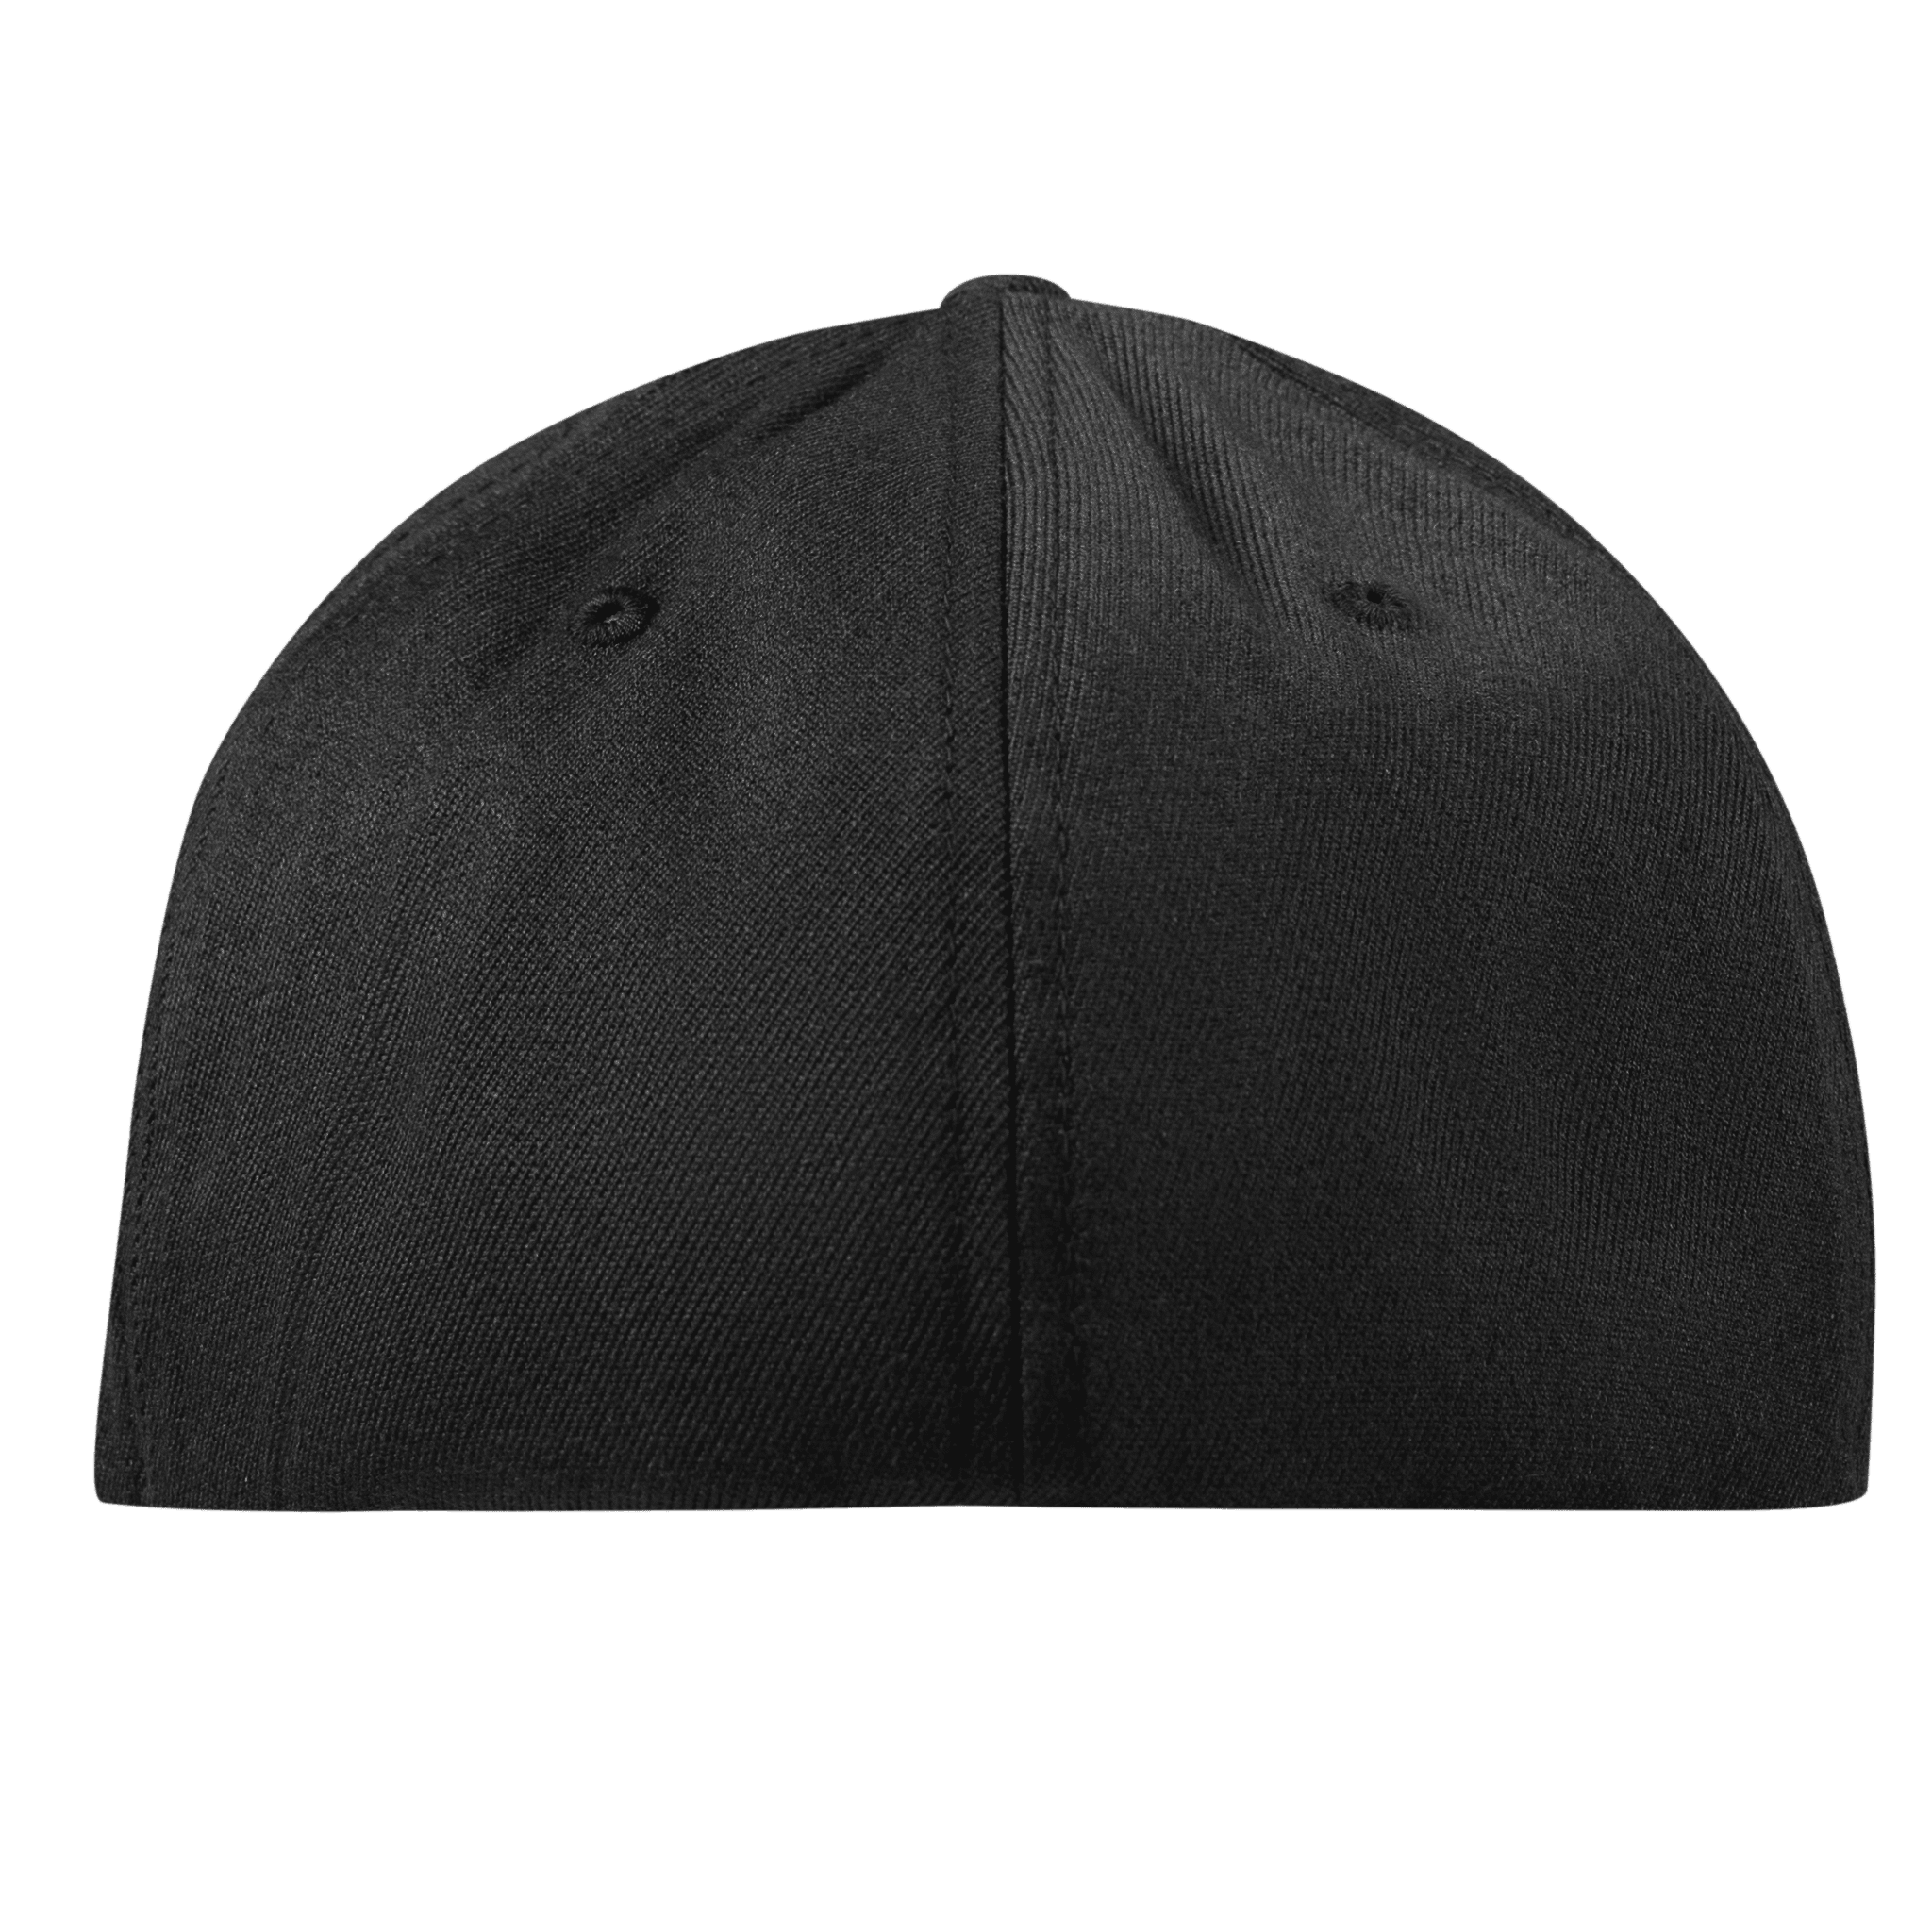 New Mexico 47 Flexfit Fitted Back Black